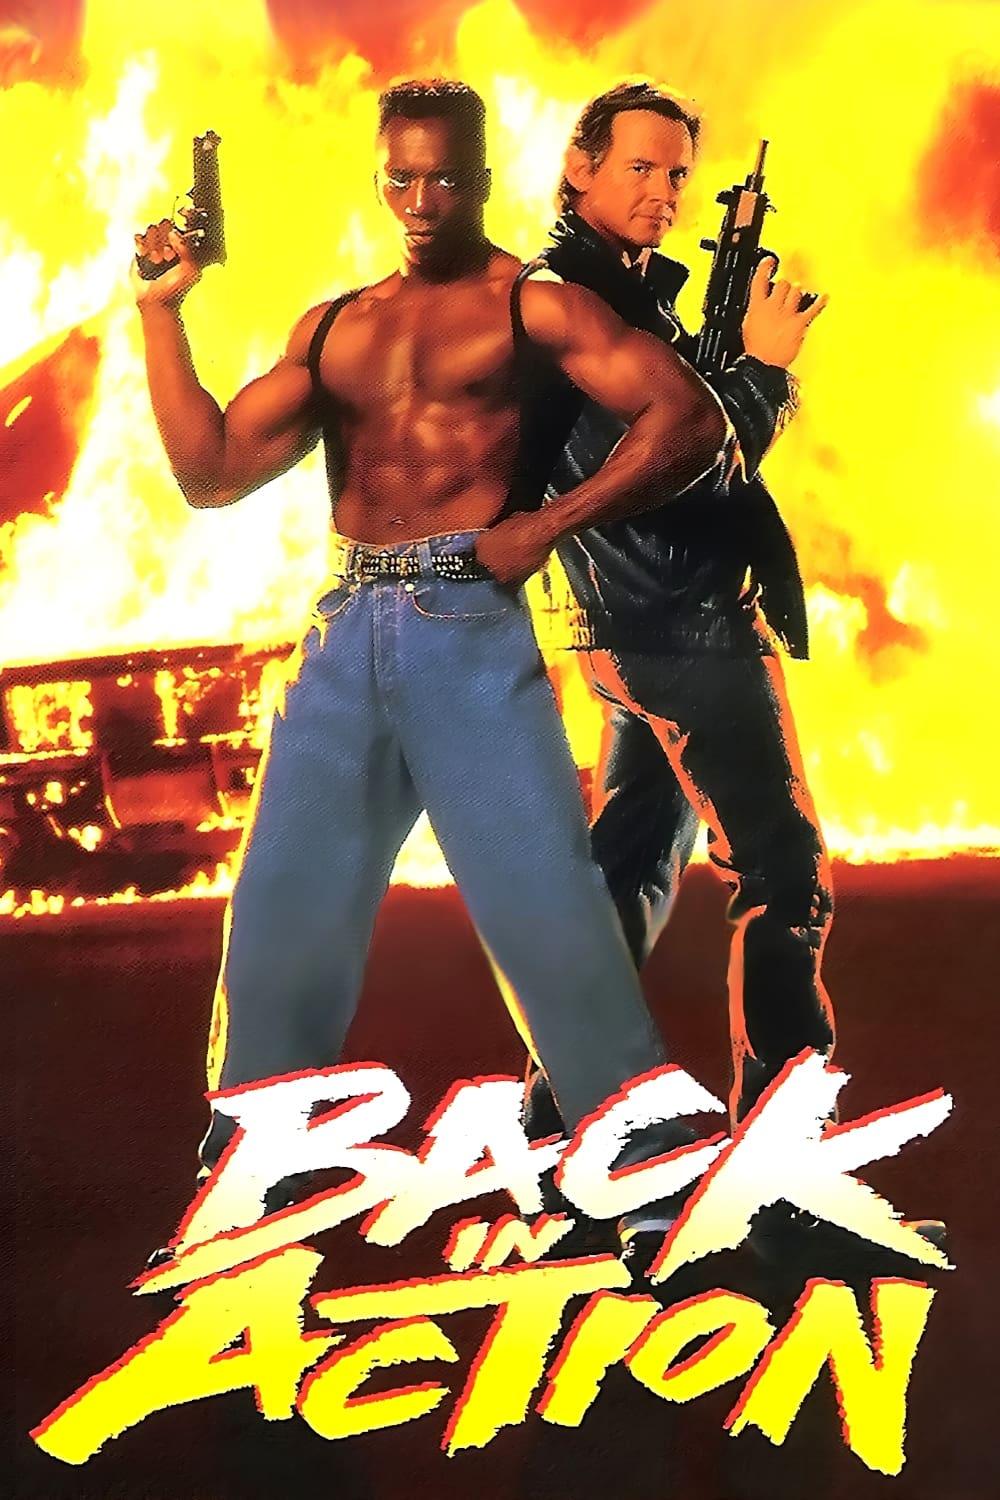 Back in Action poster